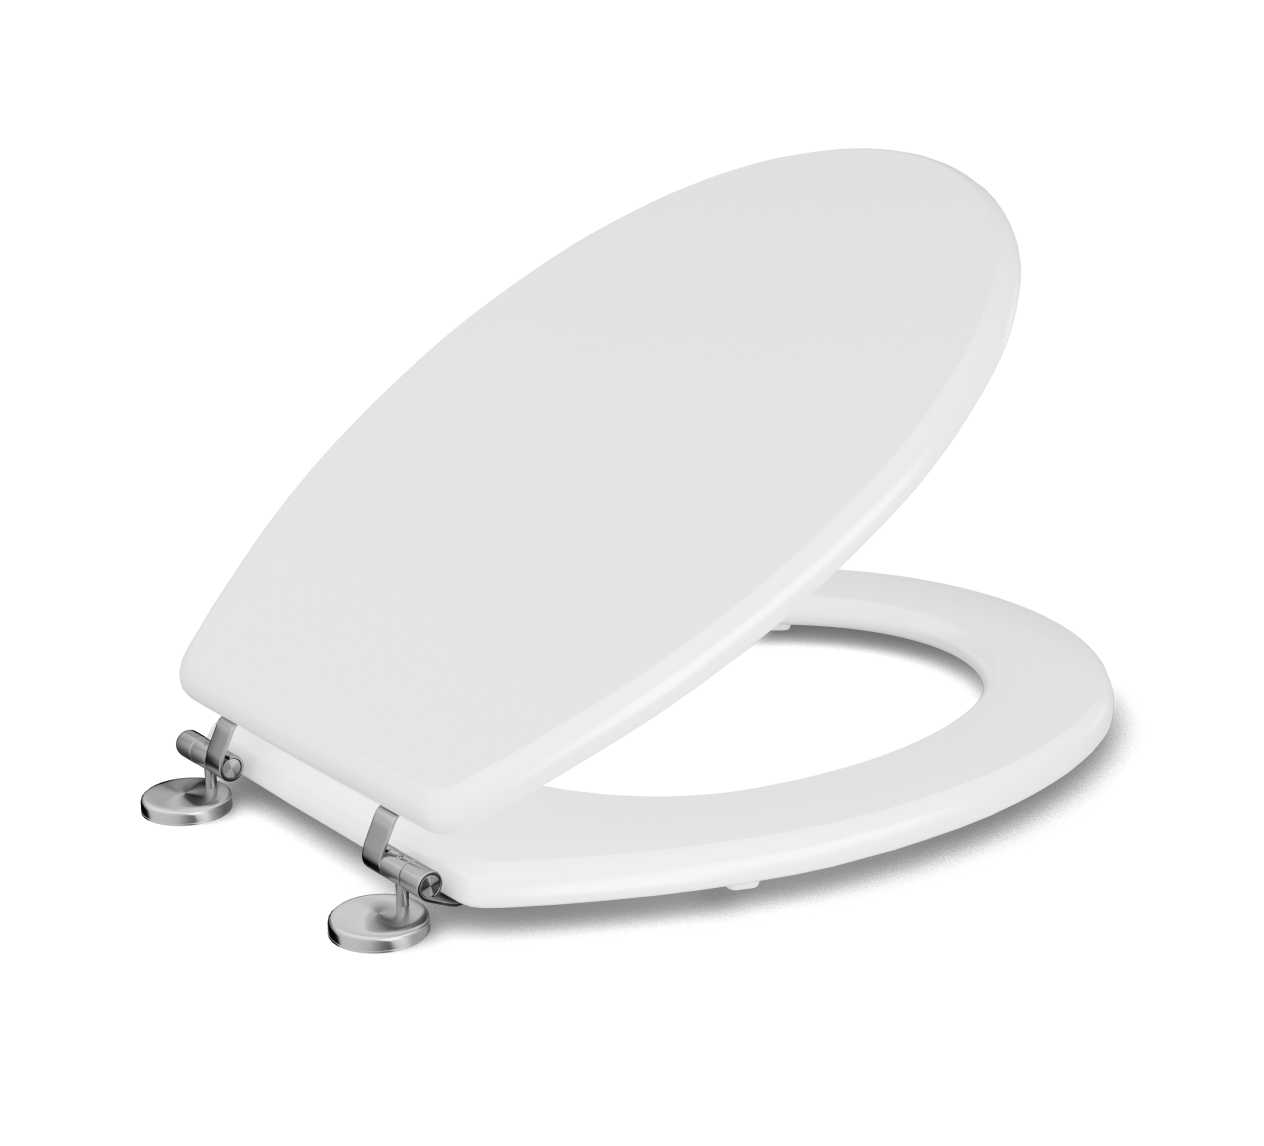 Adshank – Elongated Toilet Seat Cover – Suitable for Elongated 18